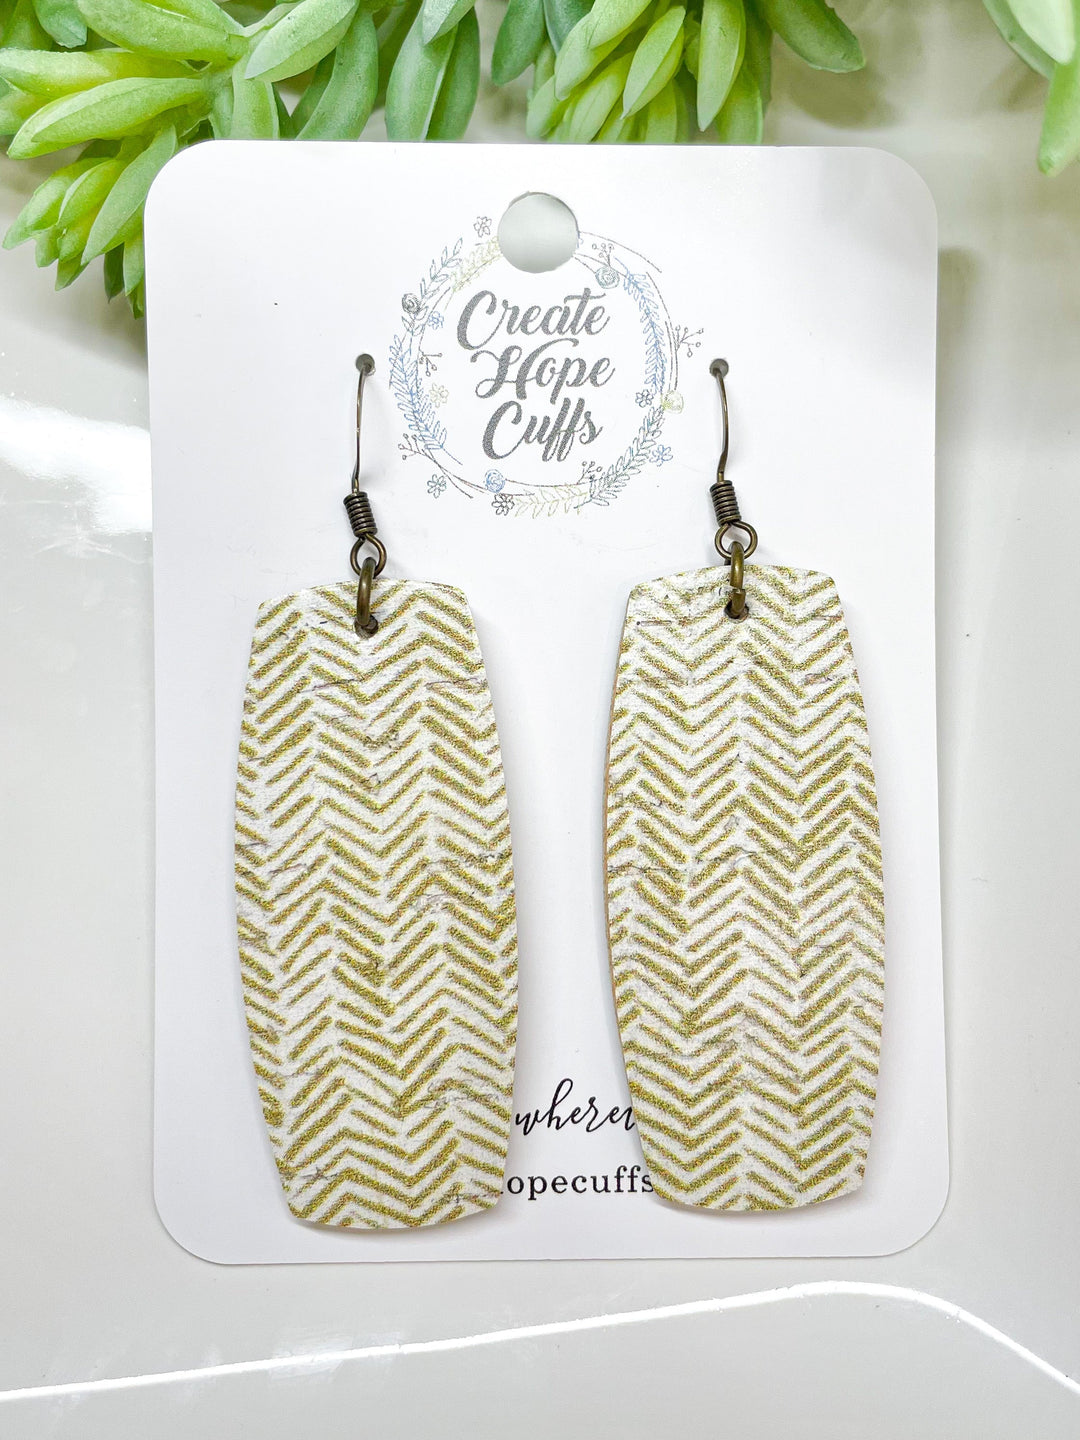 (Wholesale) Chevron Taupe Bar Leather Earrings | Stacked | Hypoallergenic | Women Leather Earrings Create Hope Cuffs Long Bar 